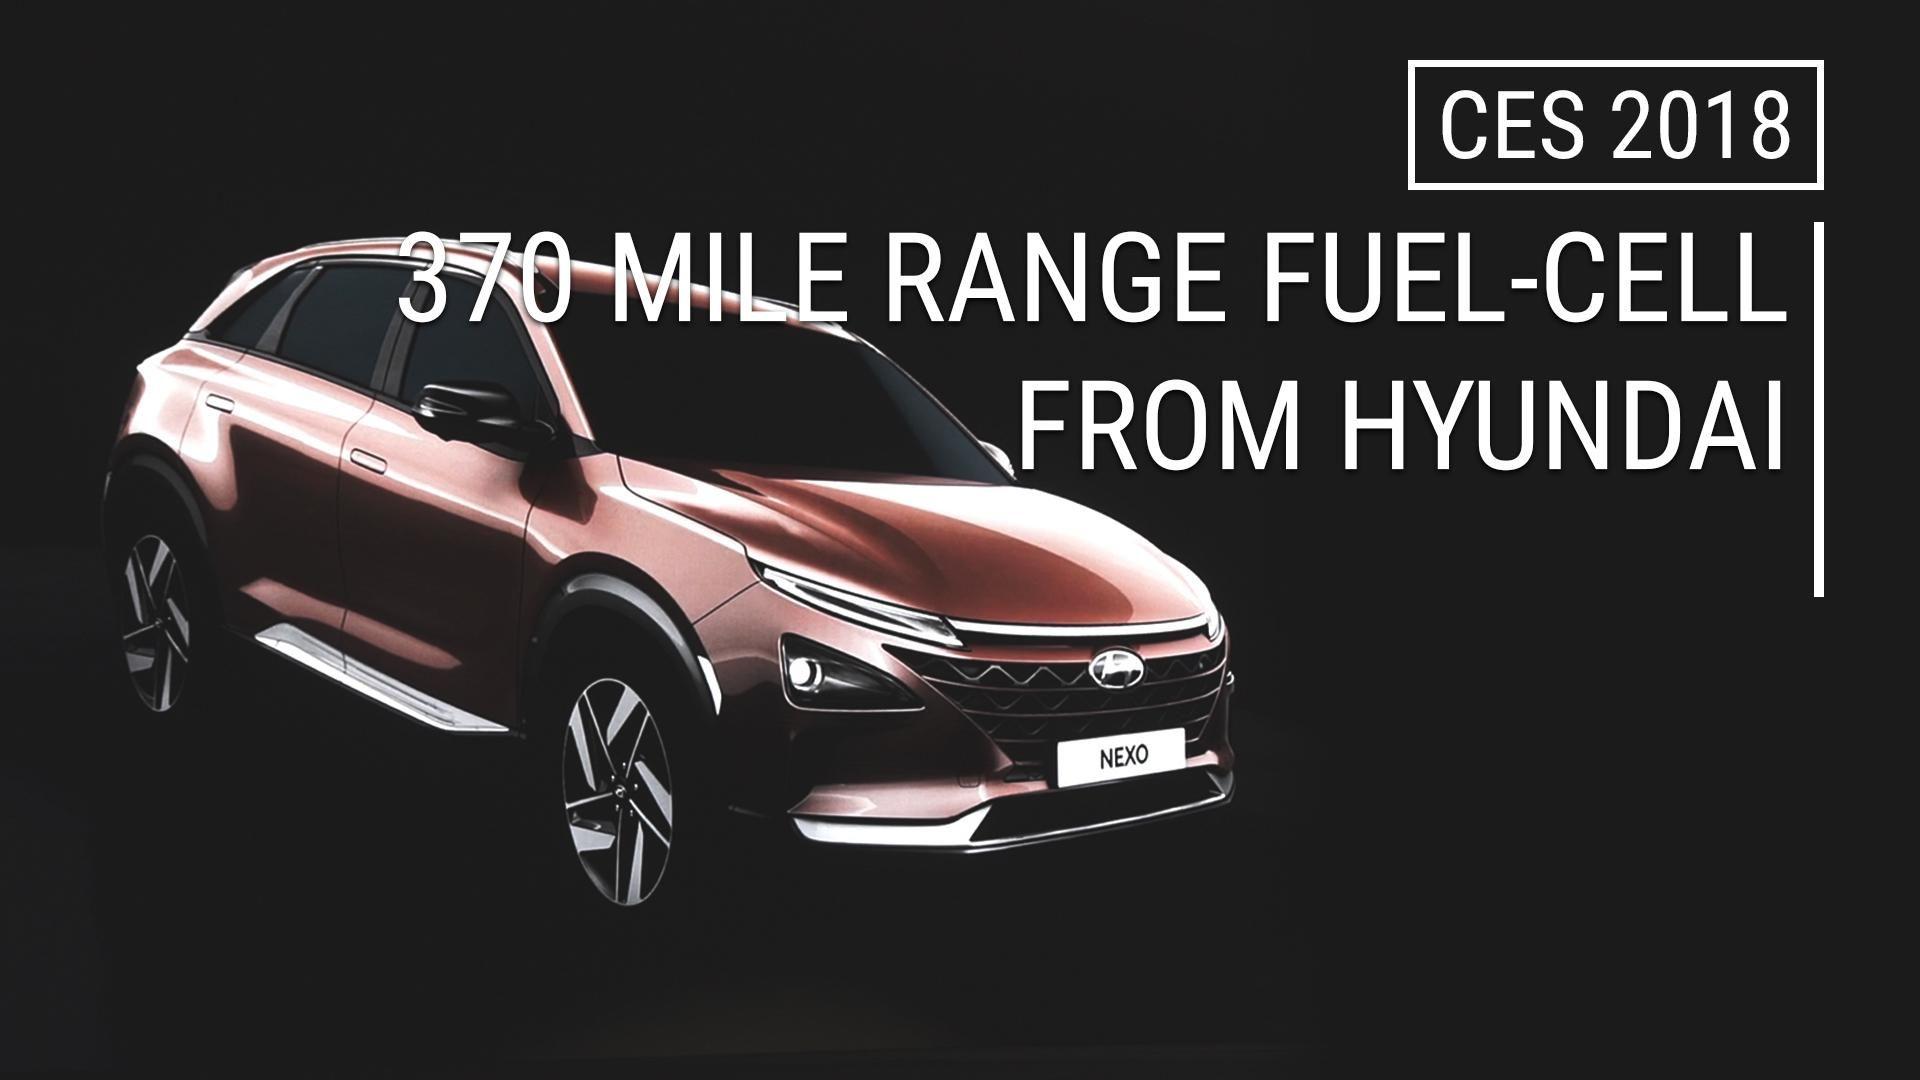 Hyundai Nexo Is The Name Of Automaker's Next Hydrogen Fuel Cell